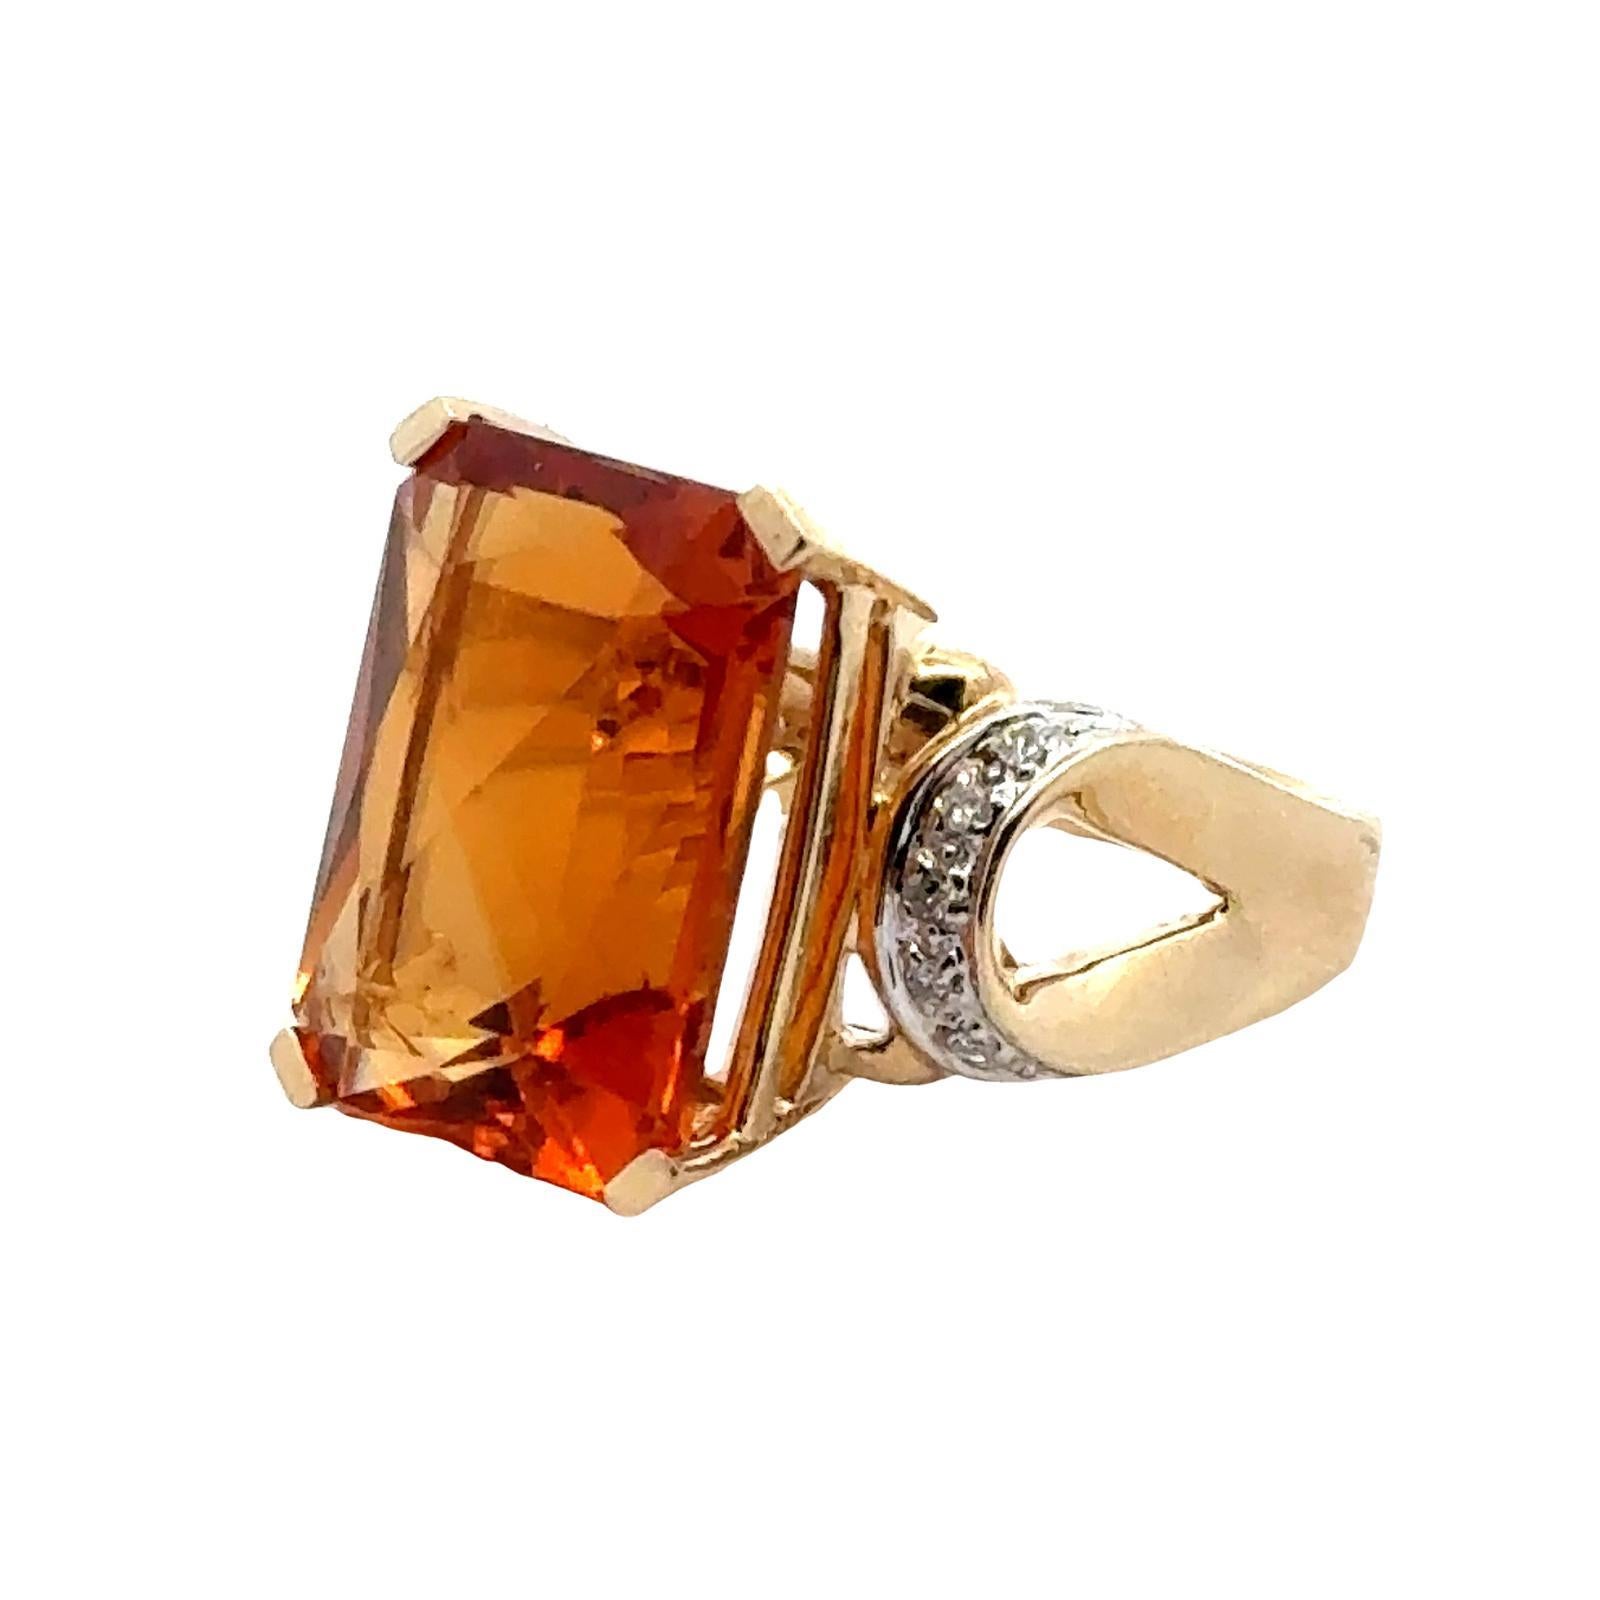 15 Carat Honey Citrine Diamond 14 Karat Yellow Gold Cocktail Ring In Excellent Condition For Sale In Boca Raton, FL